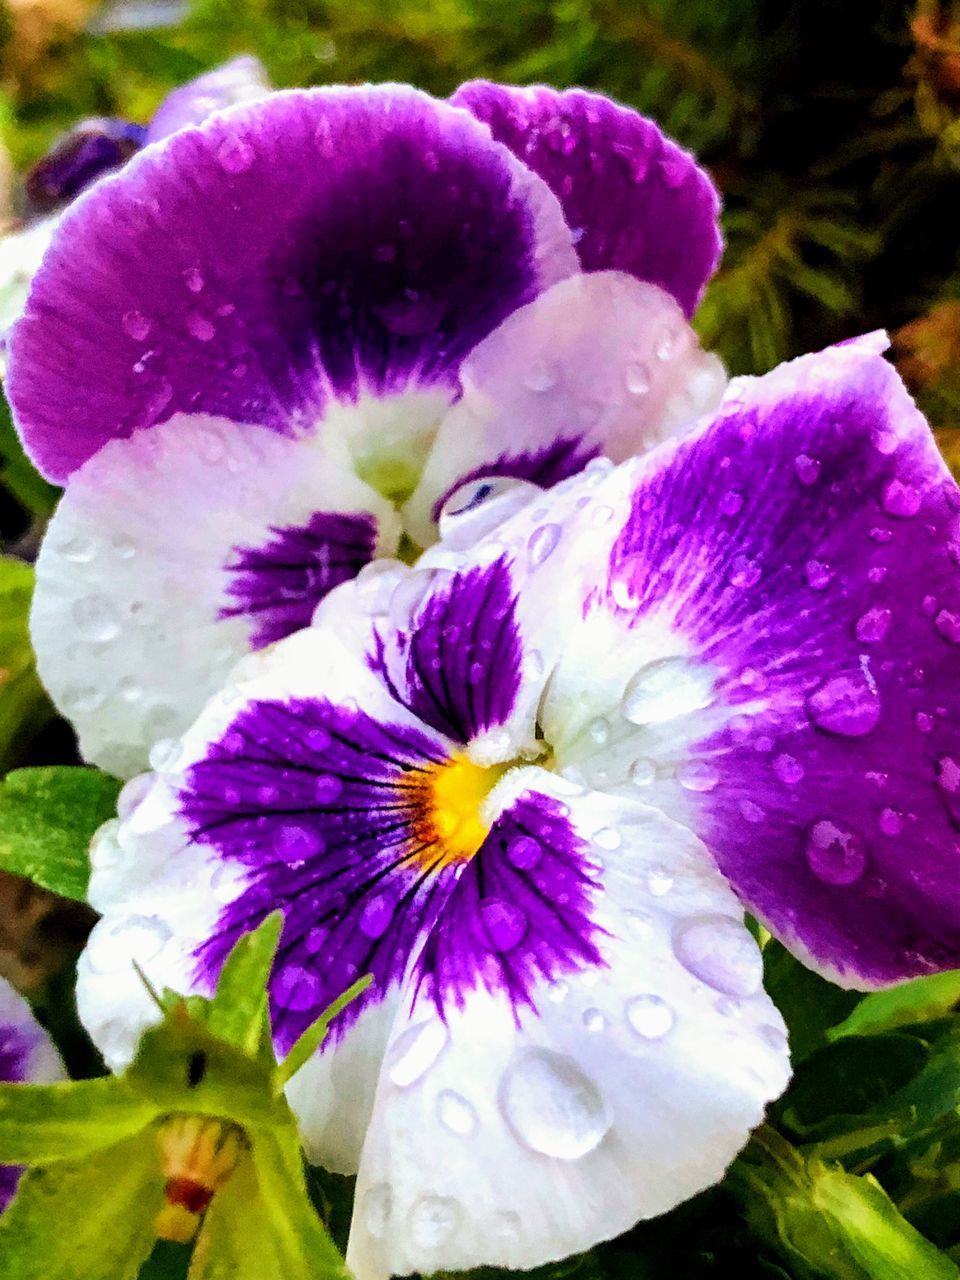 CLOSE-UP OF WATER DROPS ON PURPLE FLOWER